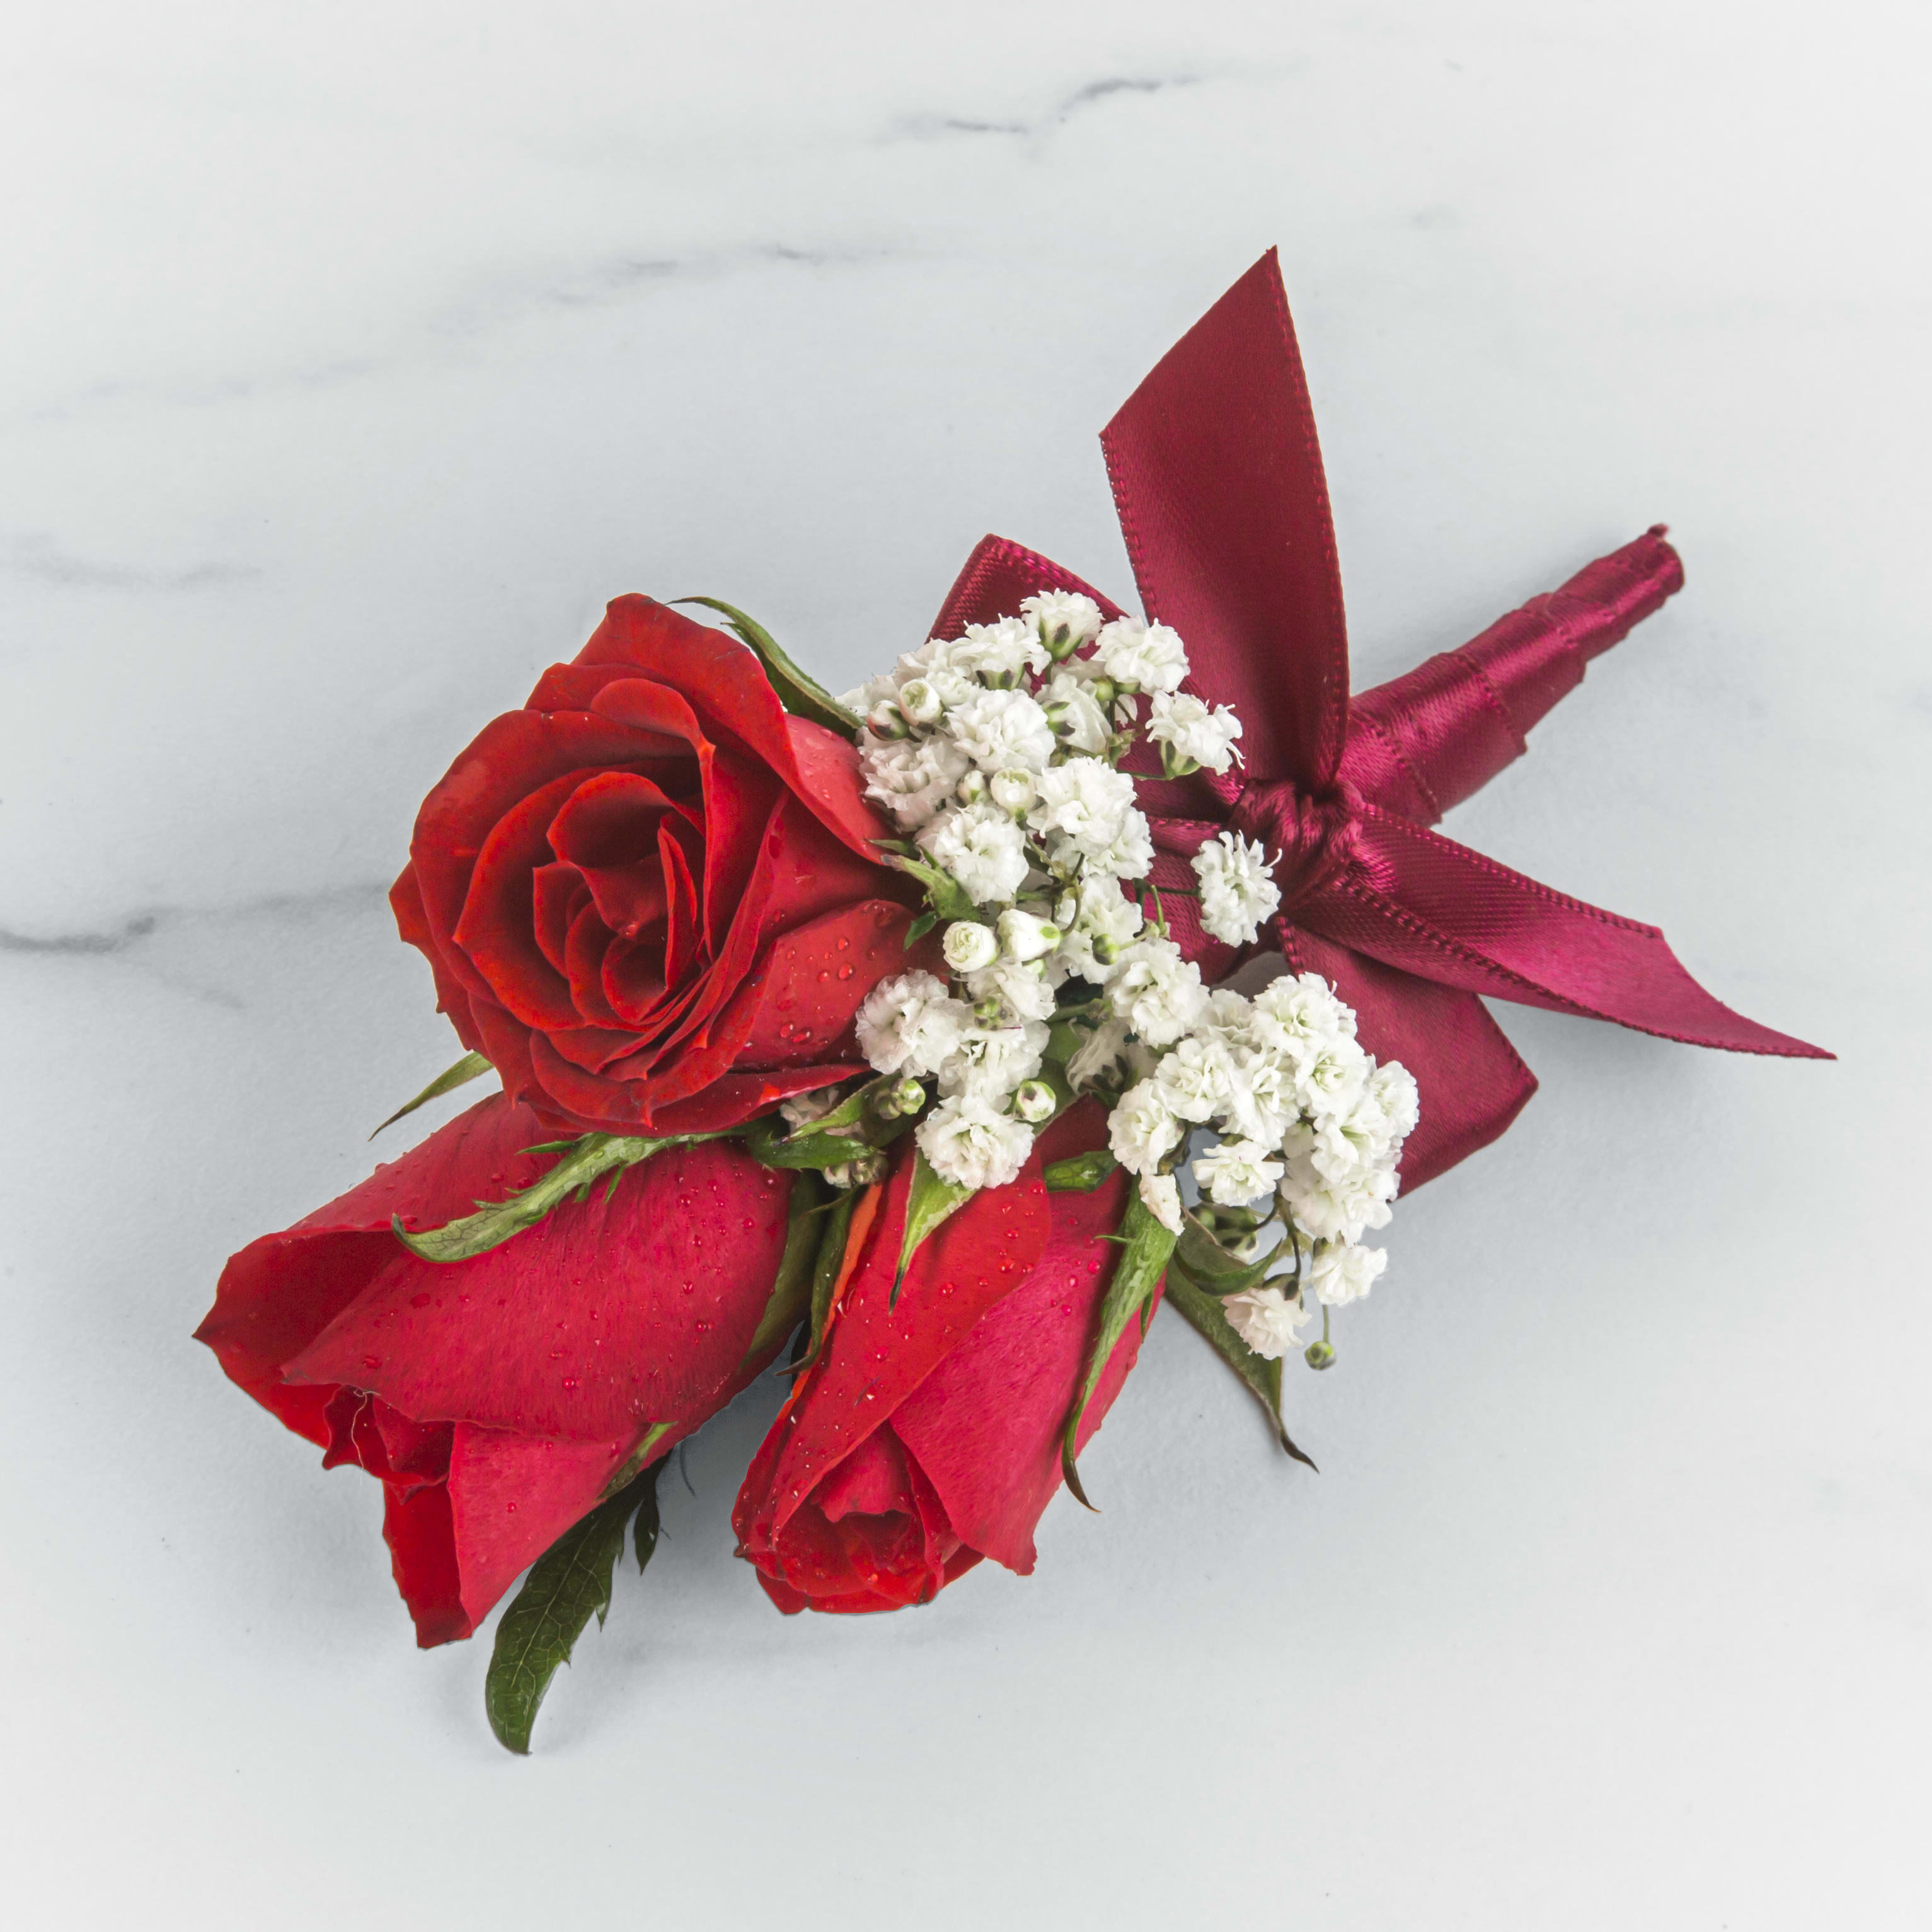 Red Rose Boutonnière  - A classic red rose boutonnière that compliments any suit. Perfect for prom, formal or wedding events.